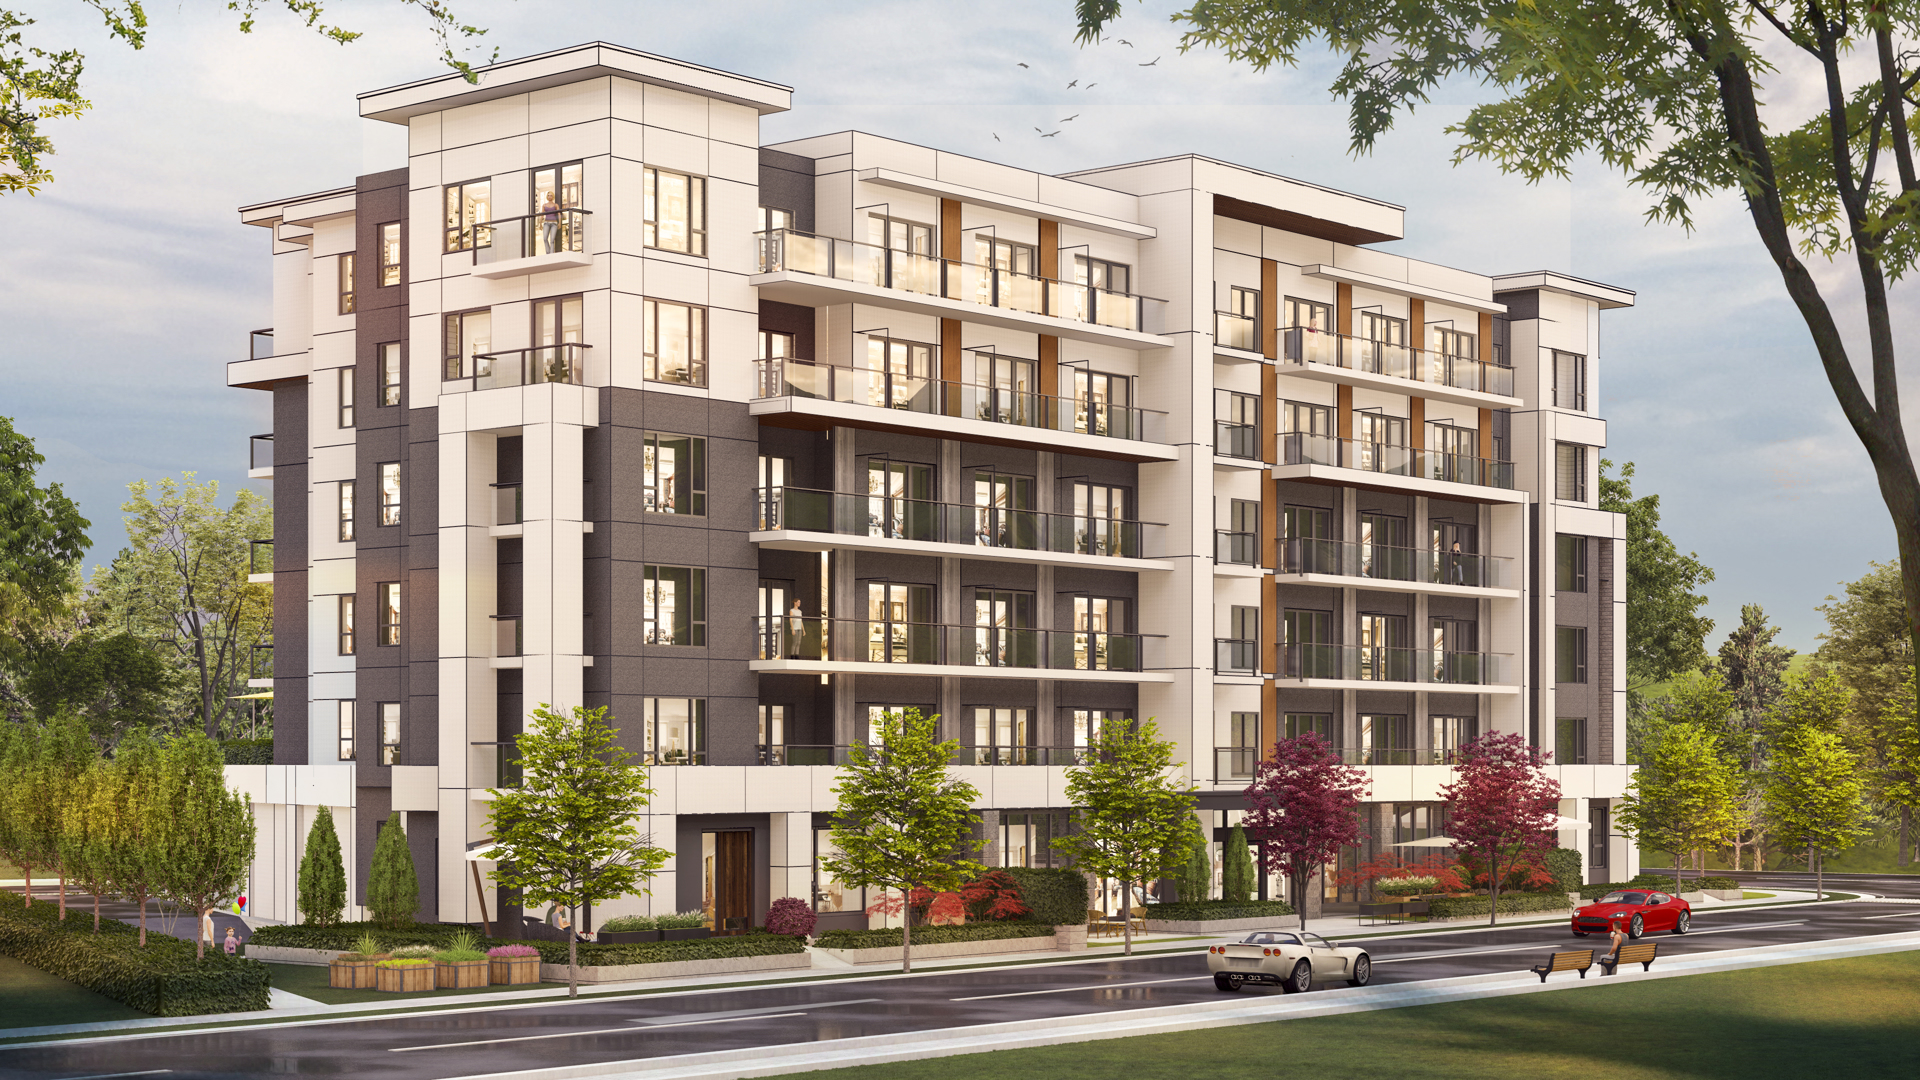 A new urban collection of Capri-Landmark condominiums and live-work units.